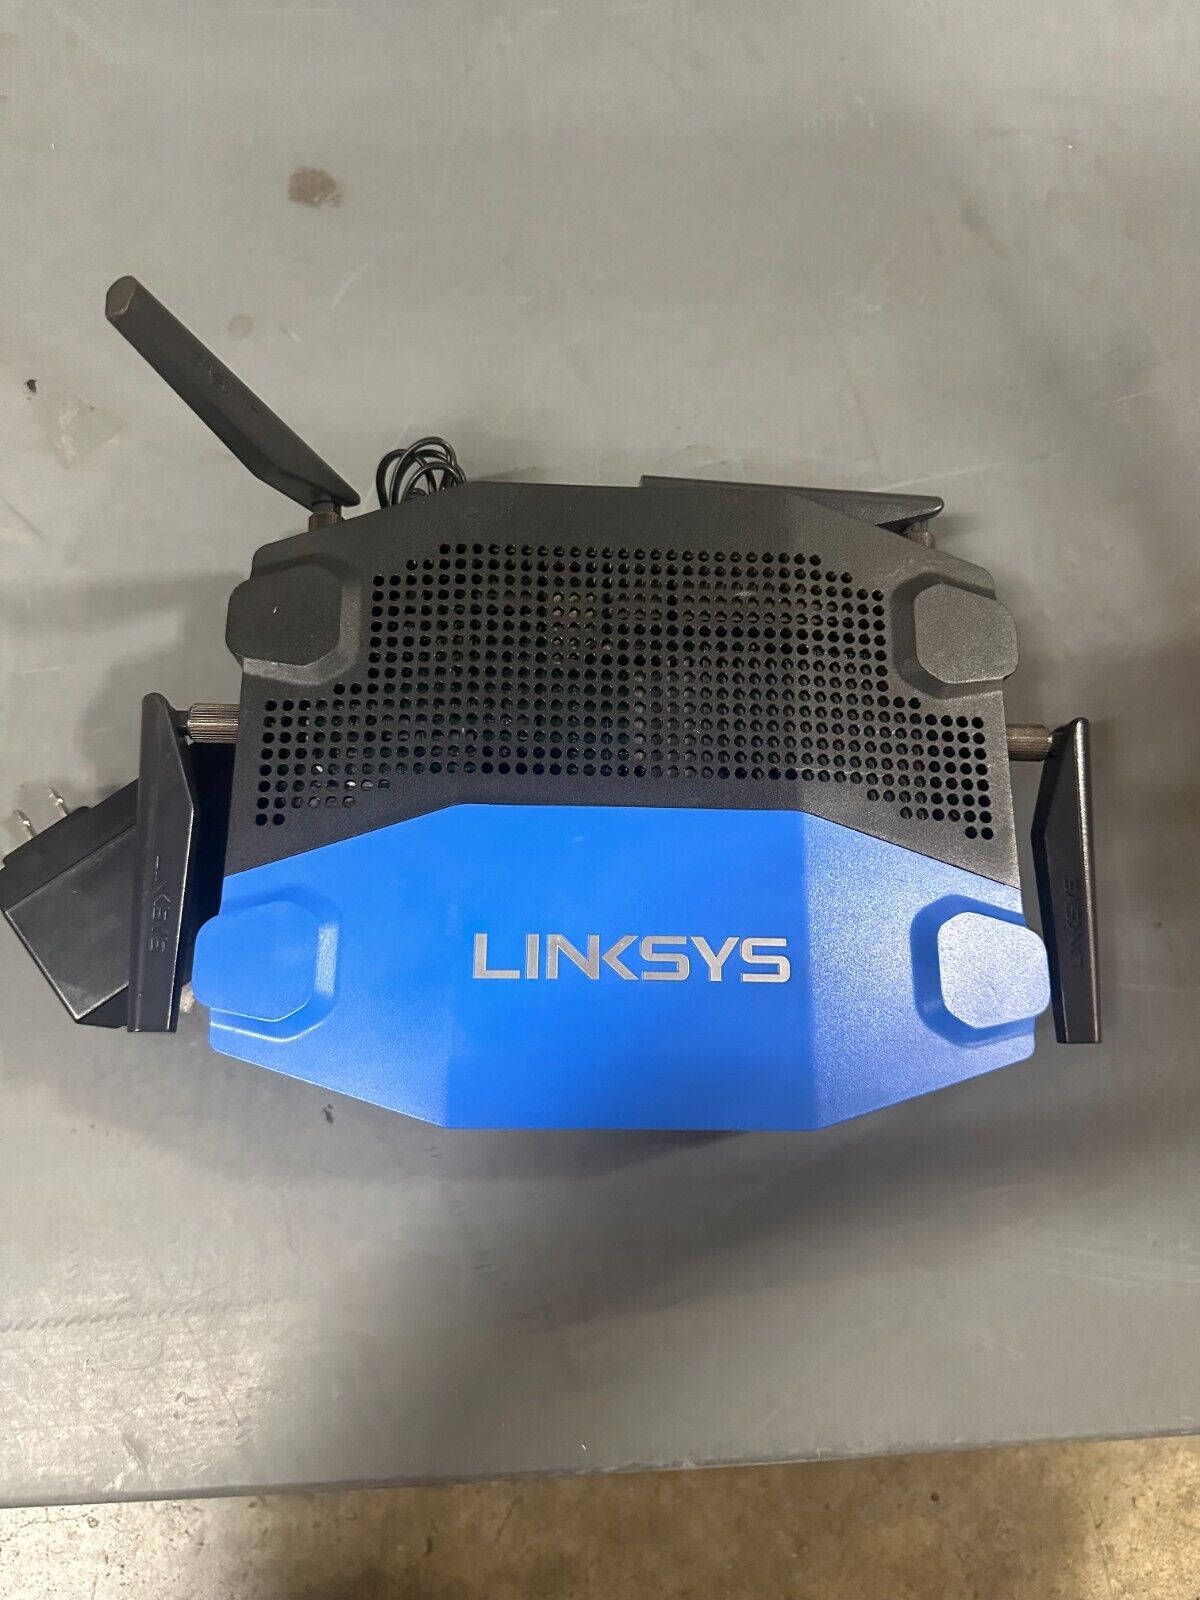 Linksys WRT3200ACM AC3200 Dual-Band Wi-Fi Router